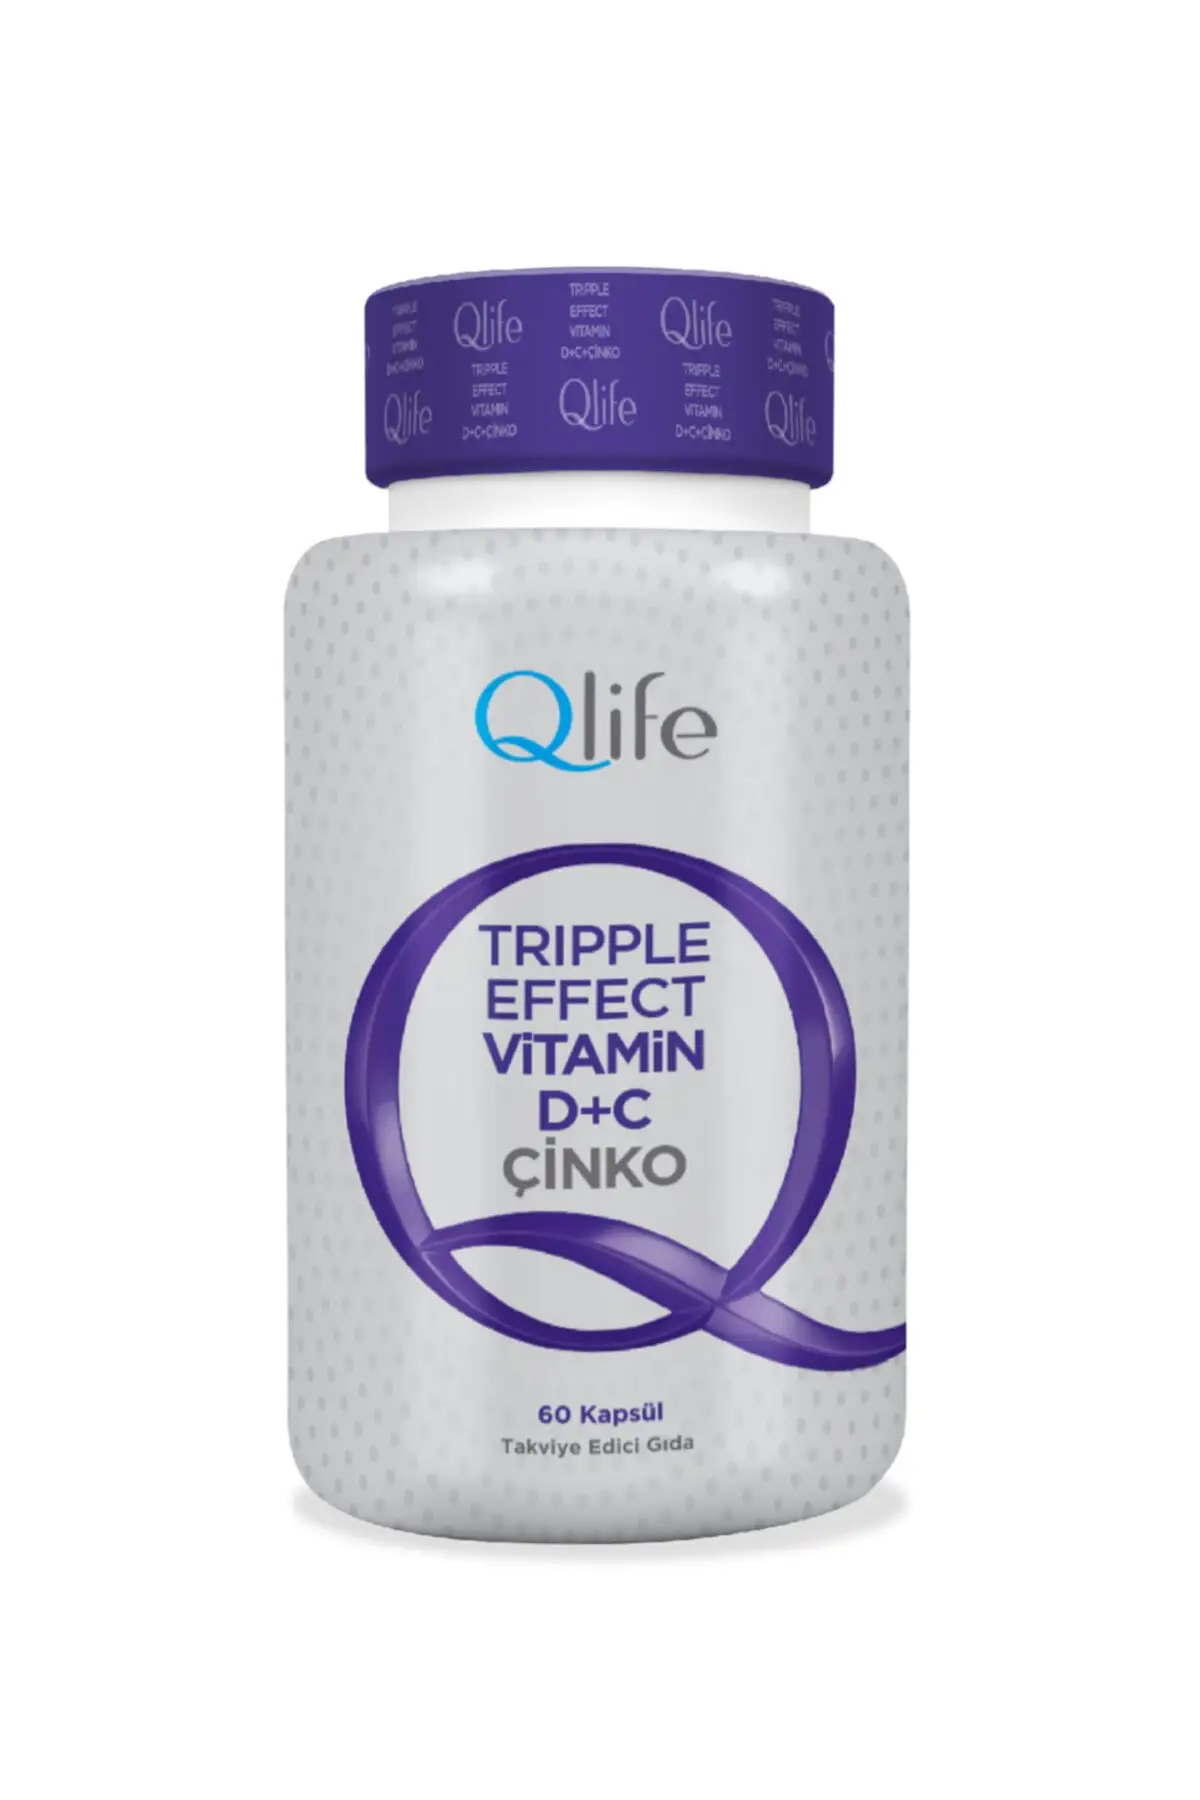 

Qlife Tripple Effect Vitamin C + D Zinc 60 Capsule extra protection high rate of vitamin c and d vitamin concise body complex bone